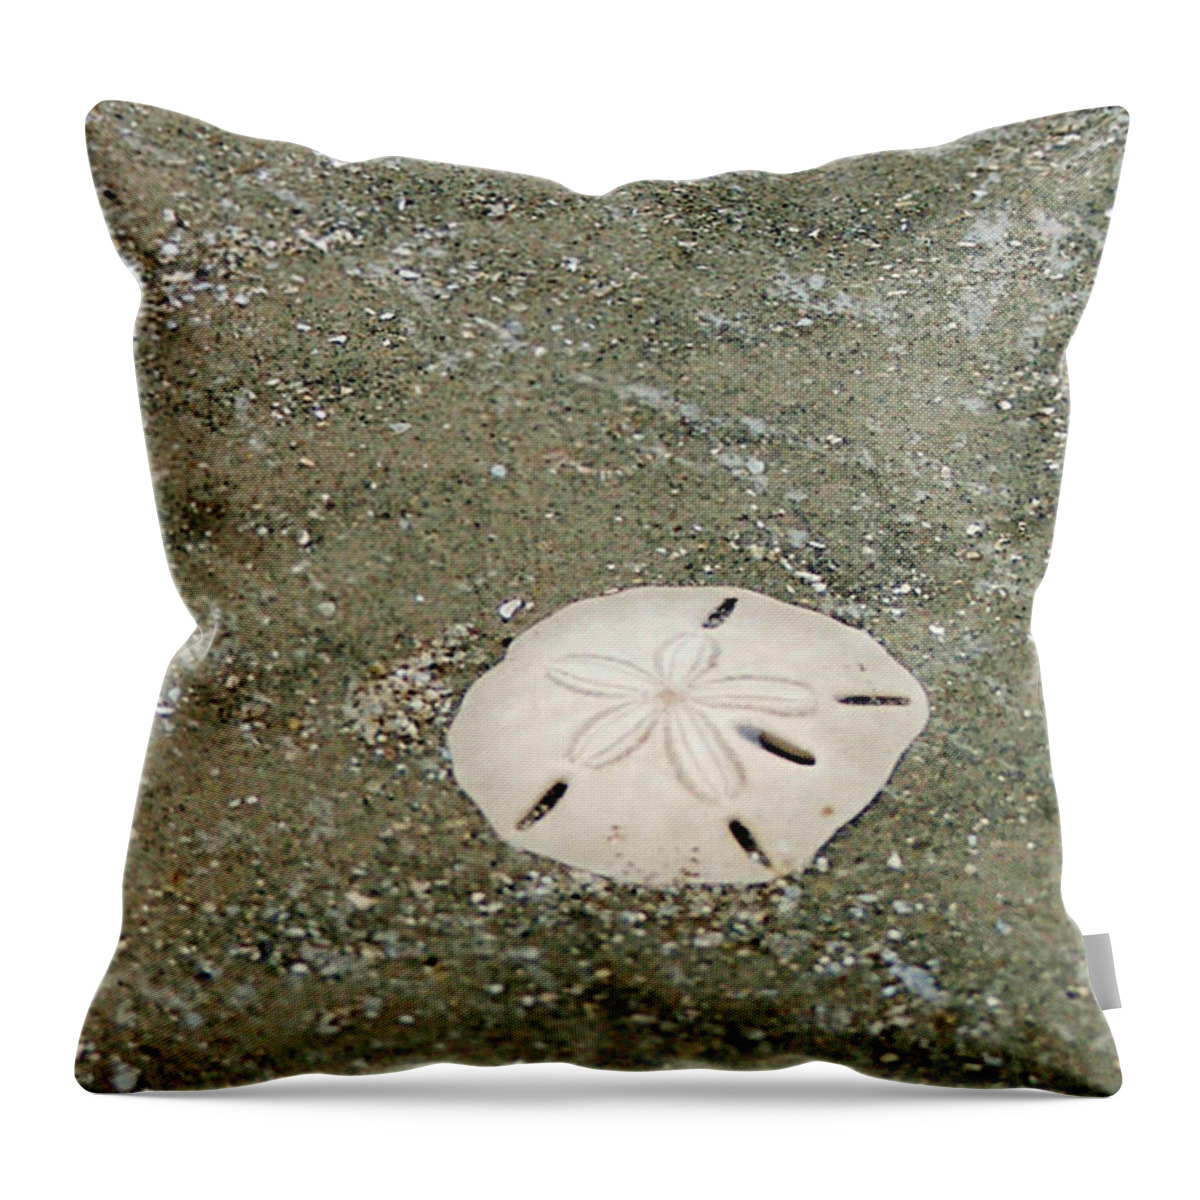 Sand Dollar Throw Pillow featuring the photograph Pick Me Up by Melinda Ledsome